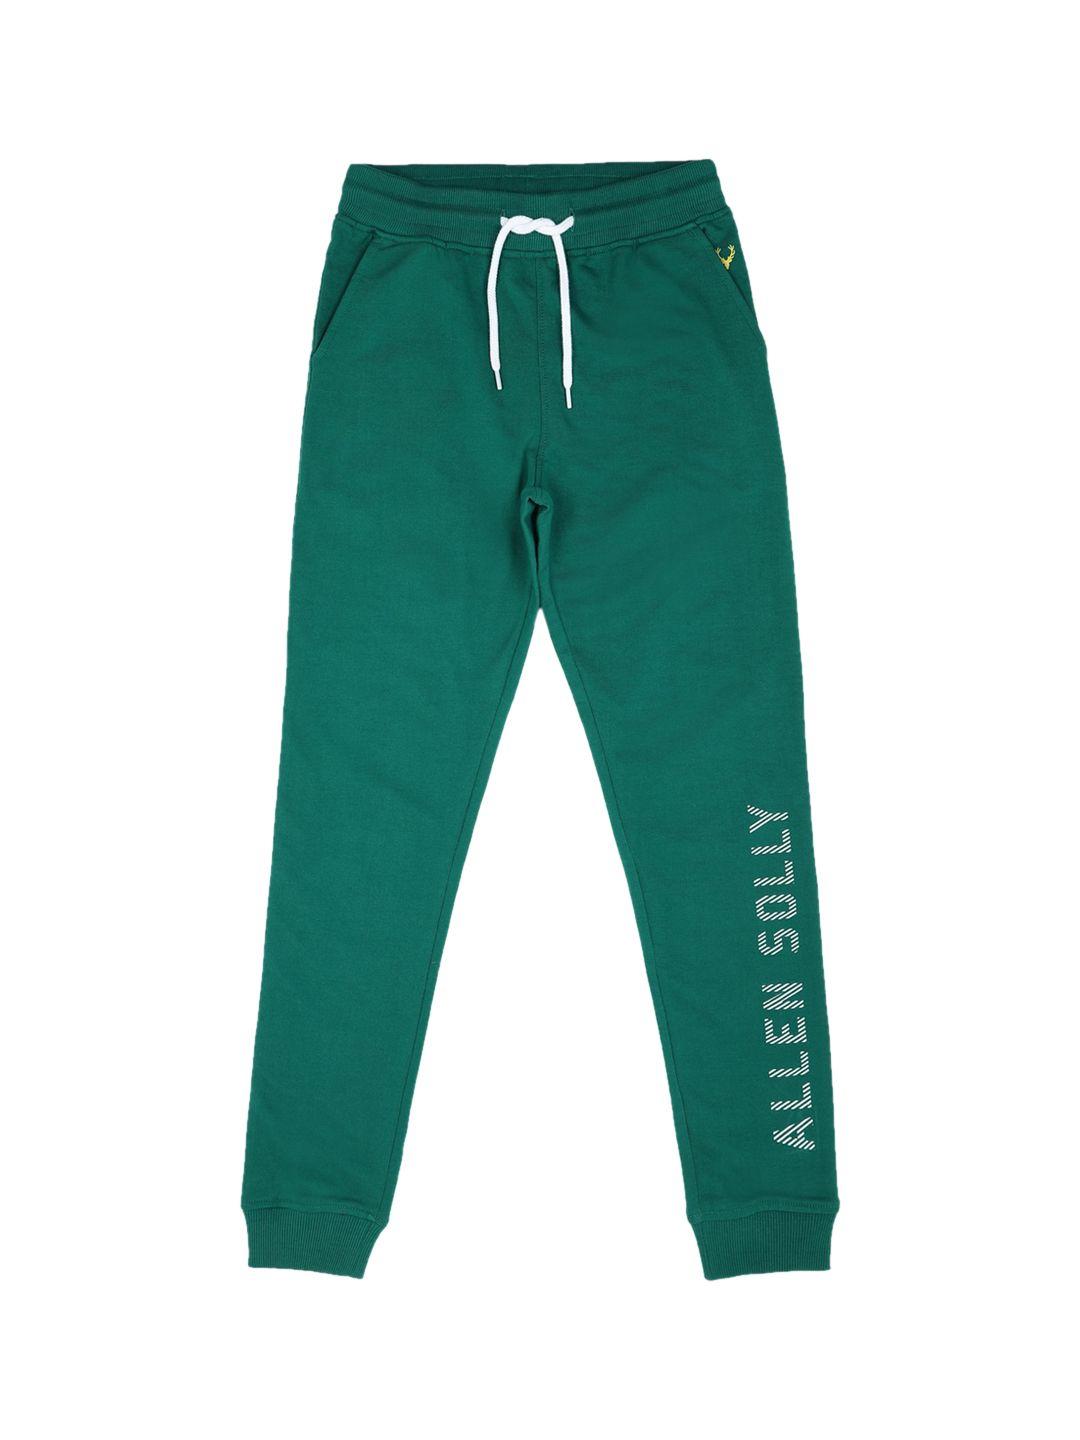 allen solly junior boys green & white regular fit printed joggers